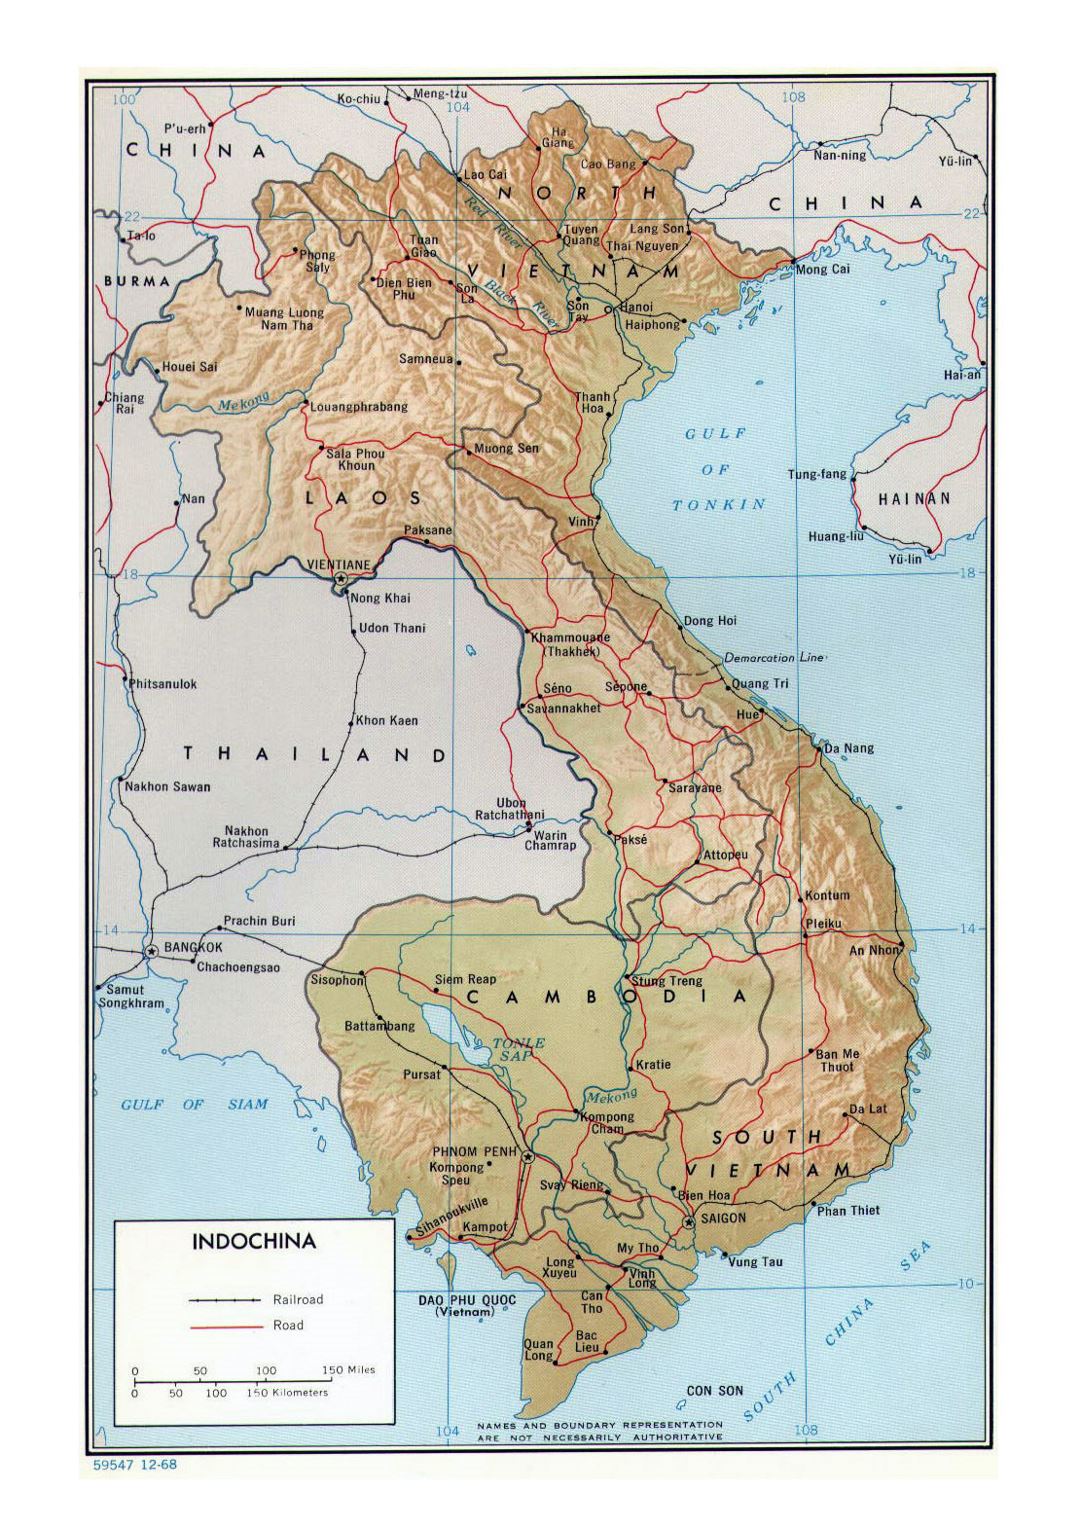 Detailed political map of Indochina with relief, roads, railroads and major cities - 1968